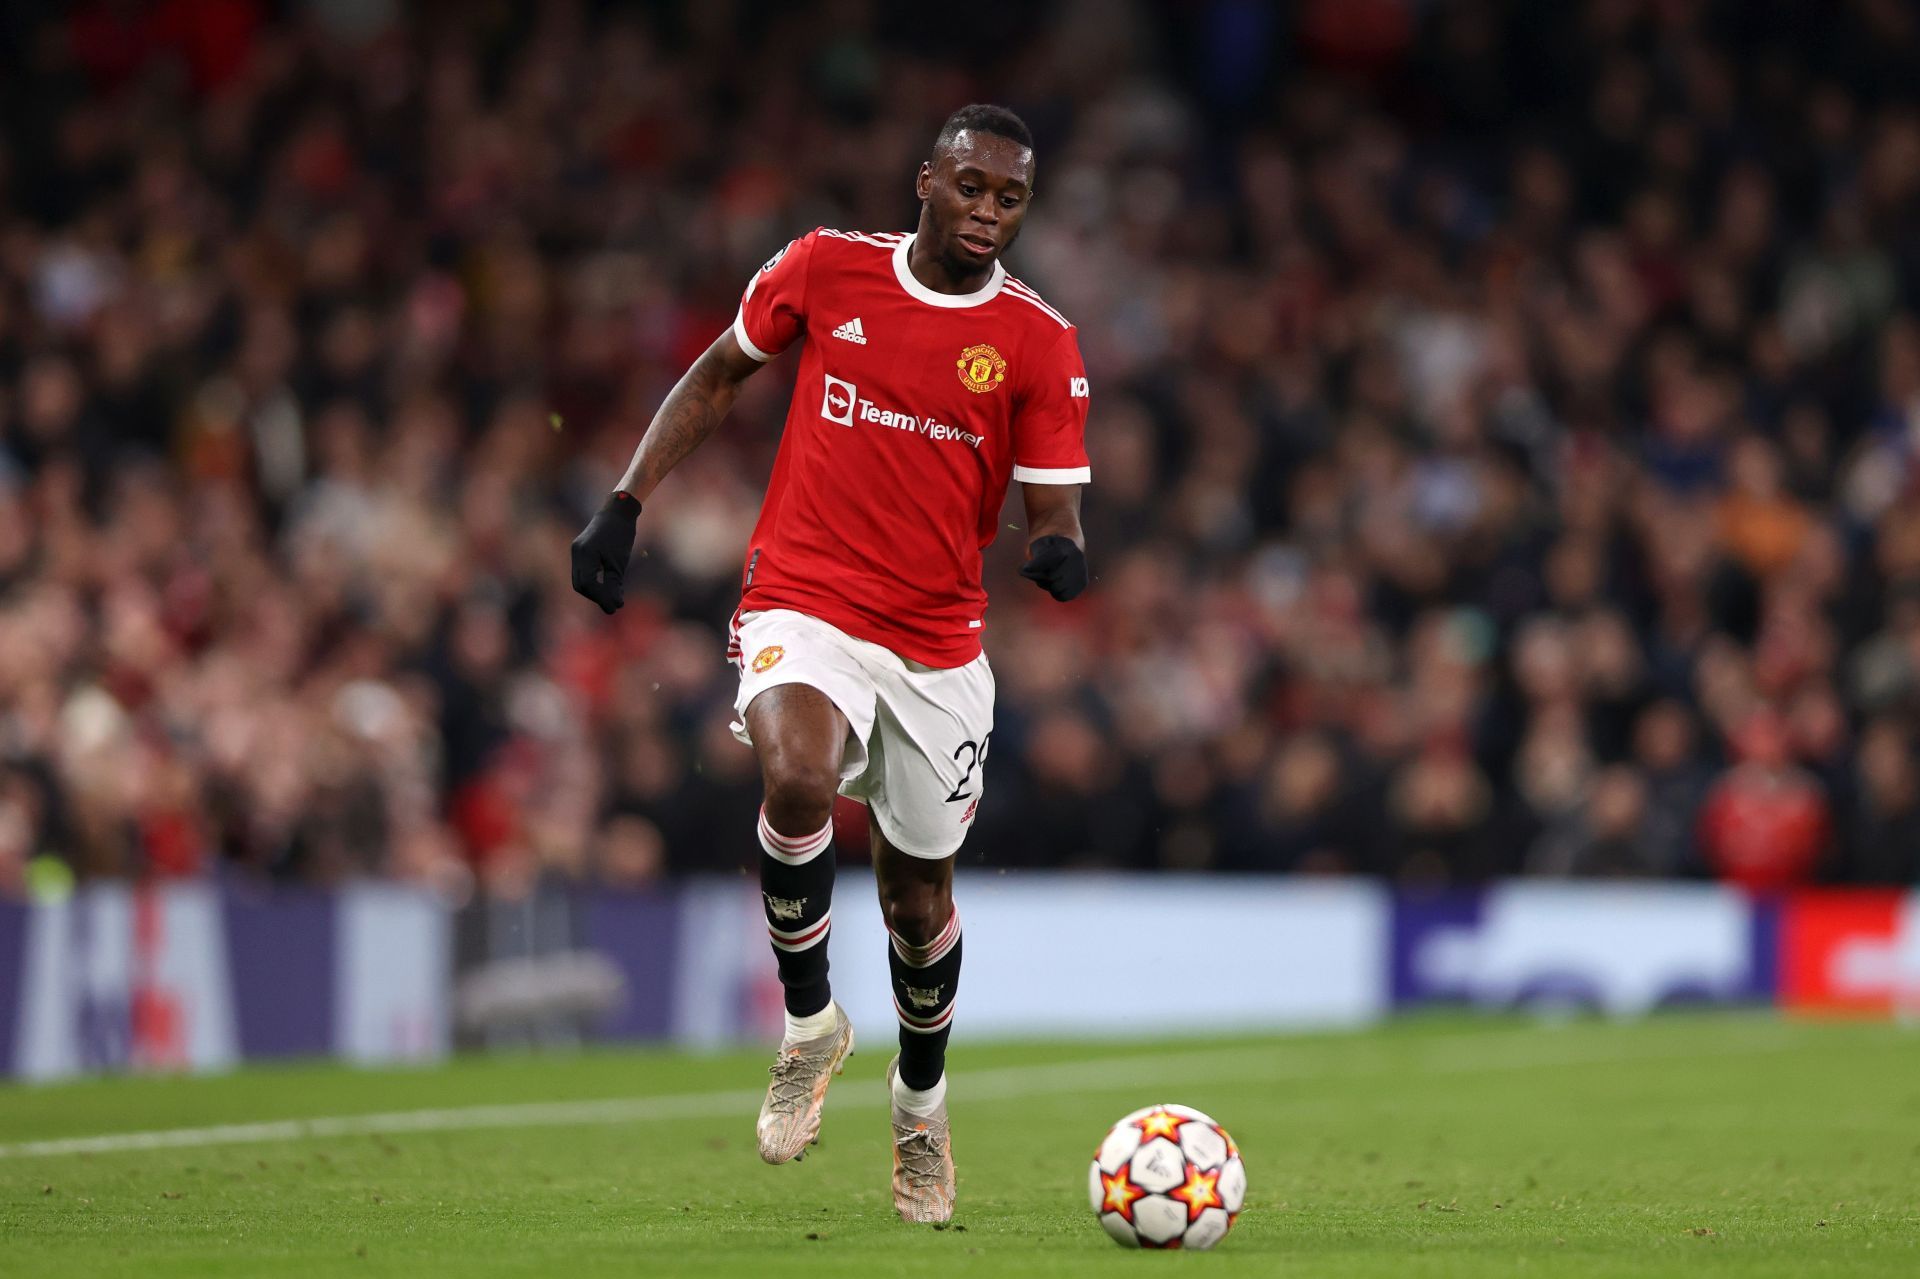 Aaron Wan-Bissaka is yet to improve his offensive work rate